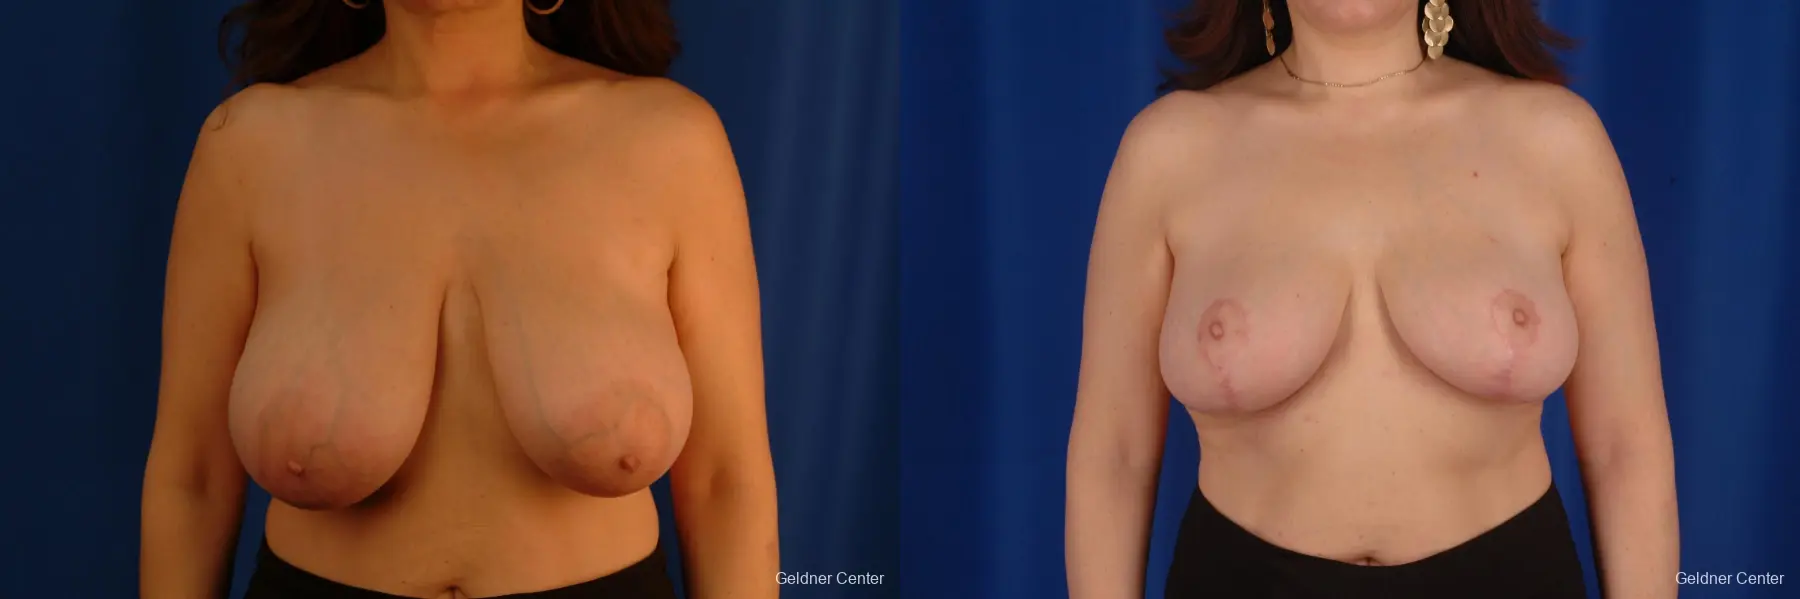 Breast Reduction Streeterville, Chicago 2289 - Before and After